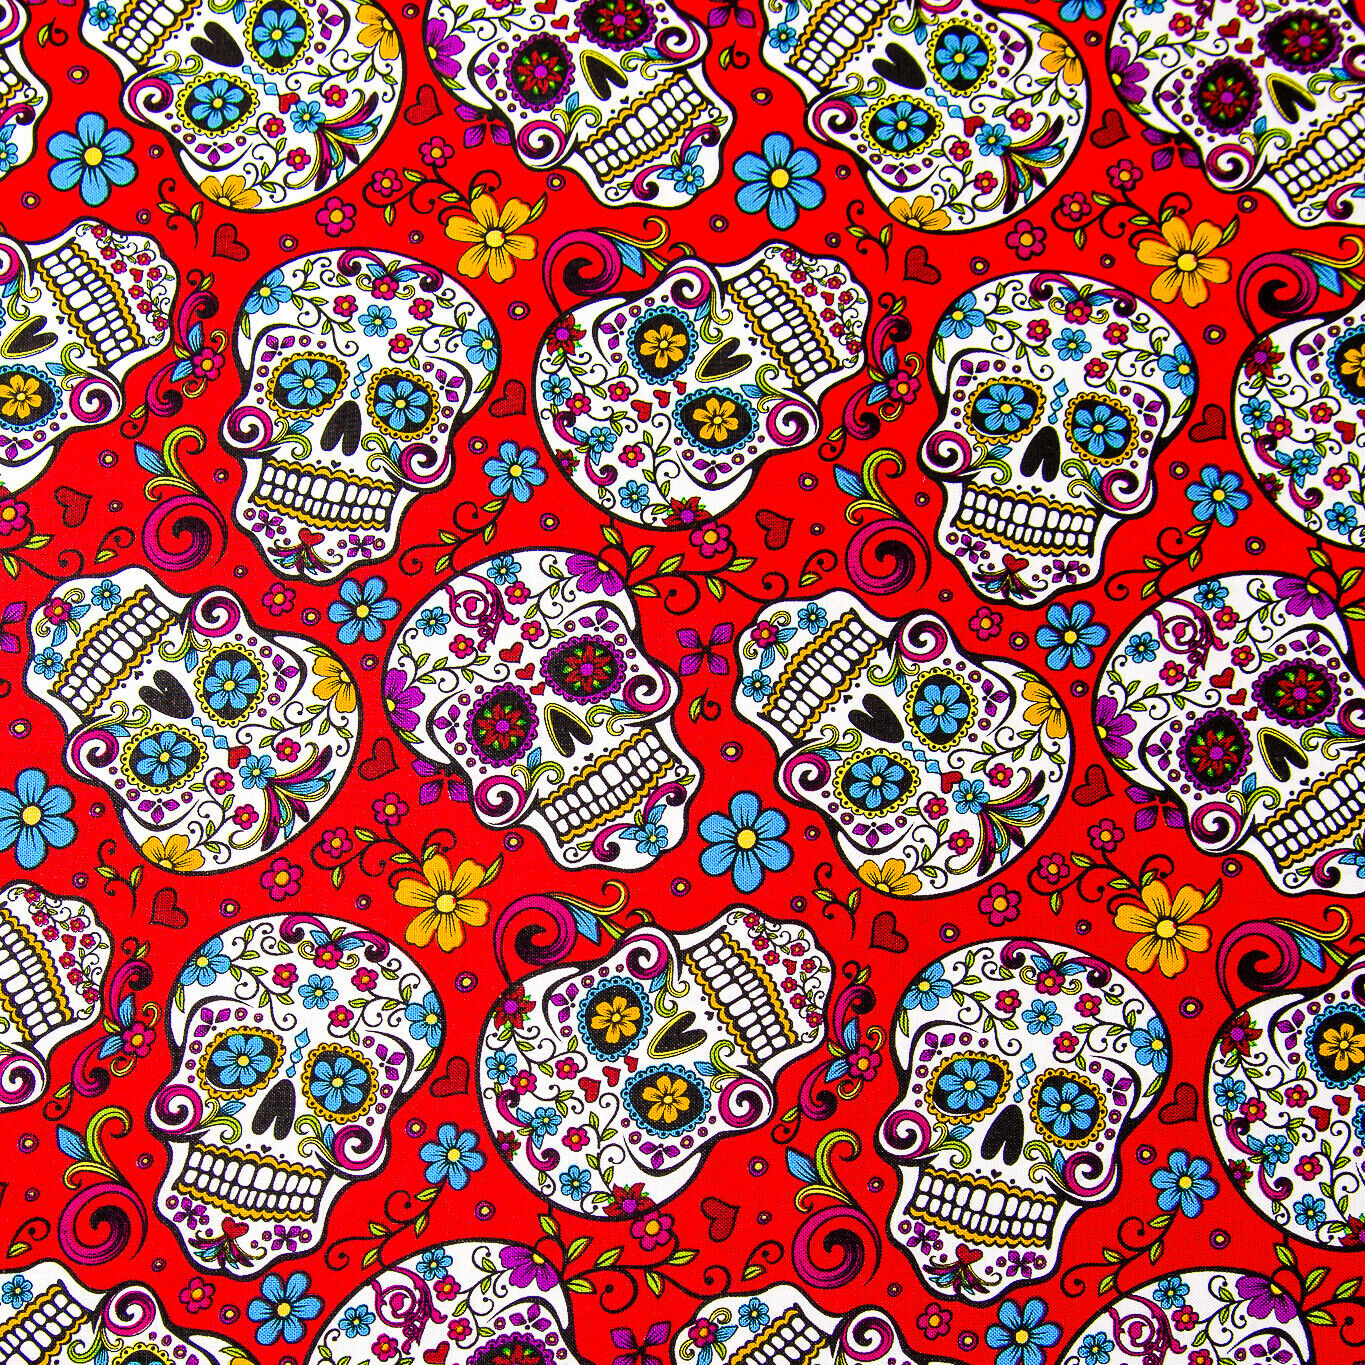 Red Candy Sugar Skull Day of the Dead - David Textiles - 100% Cotton Fabric